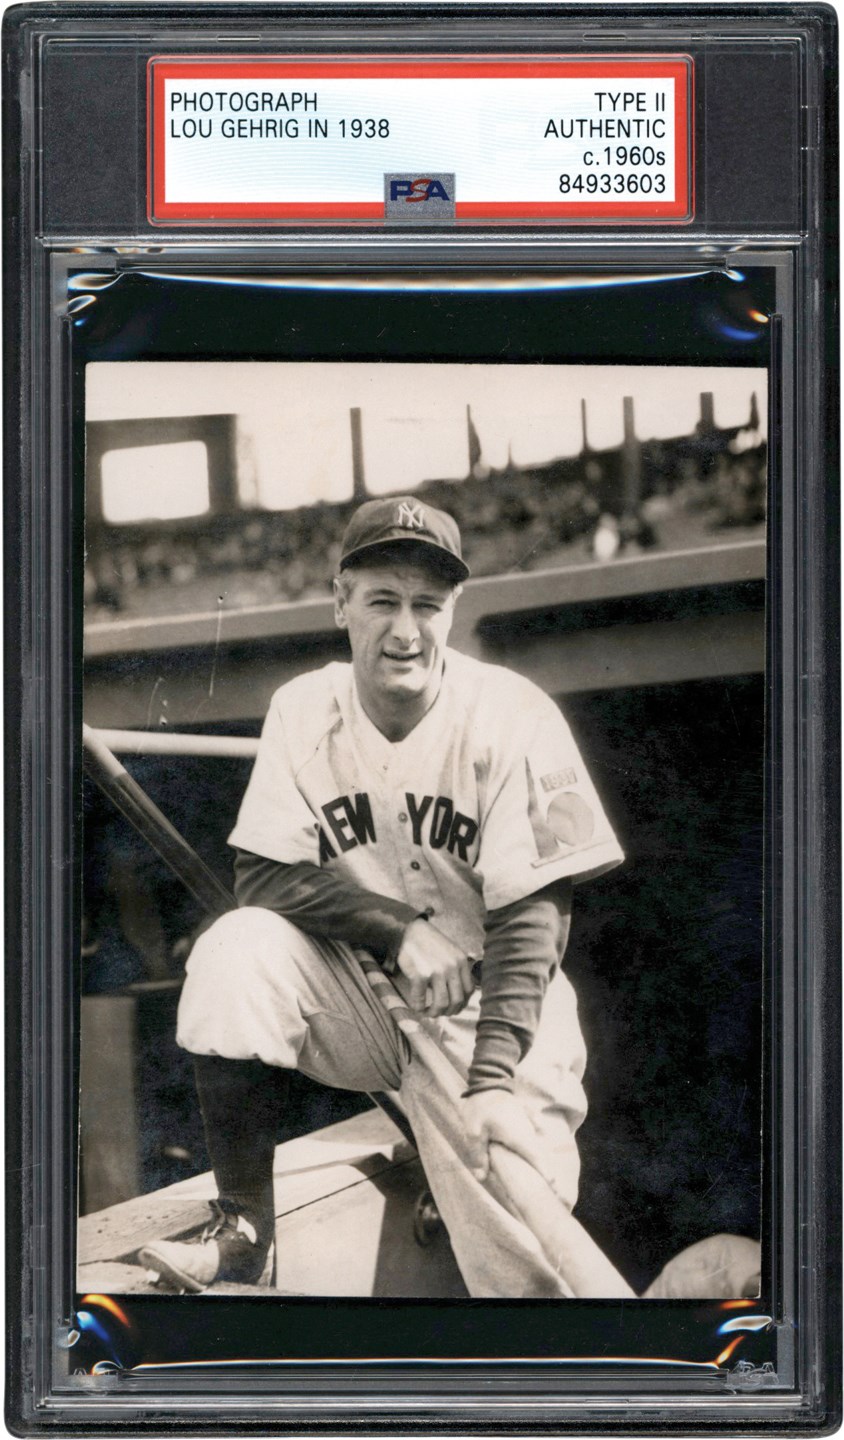 Vintage Photograph Collection w/Ruth & Gehrig (51)